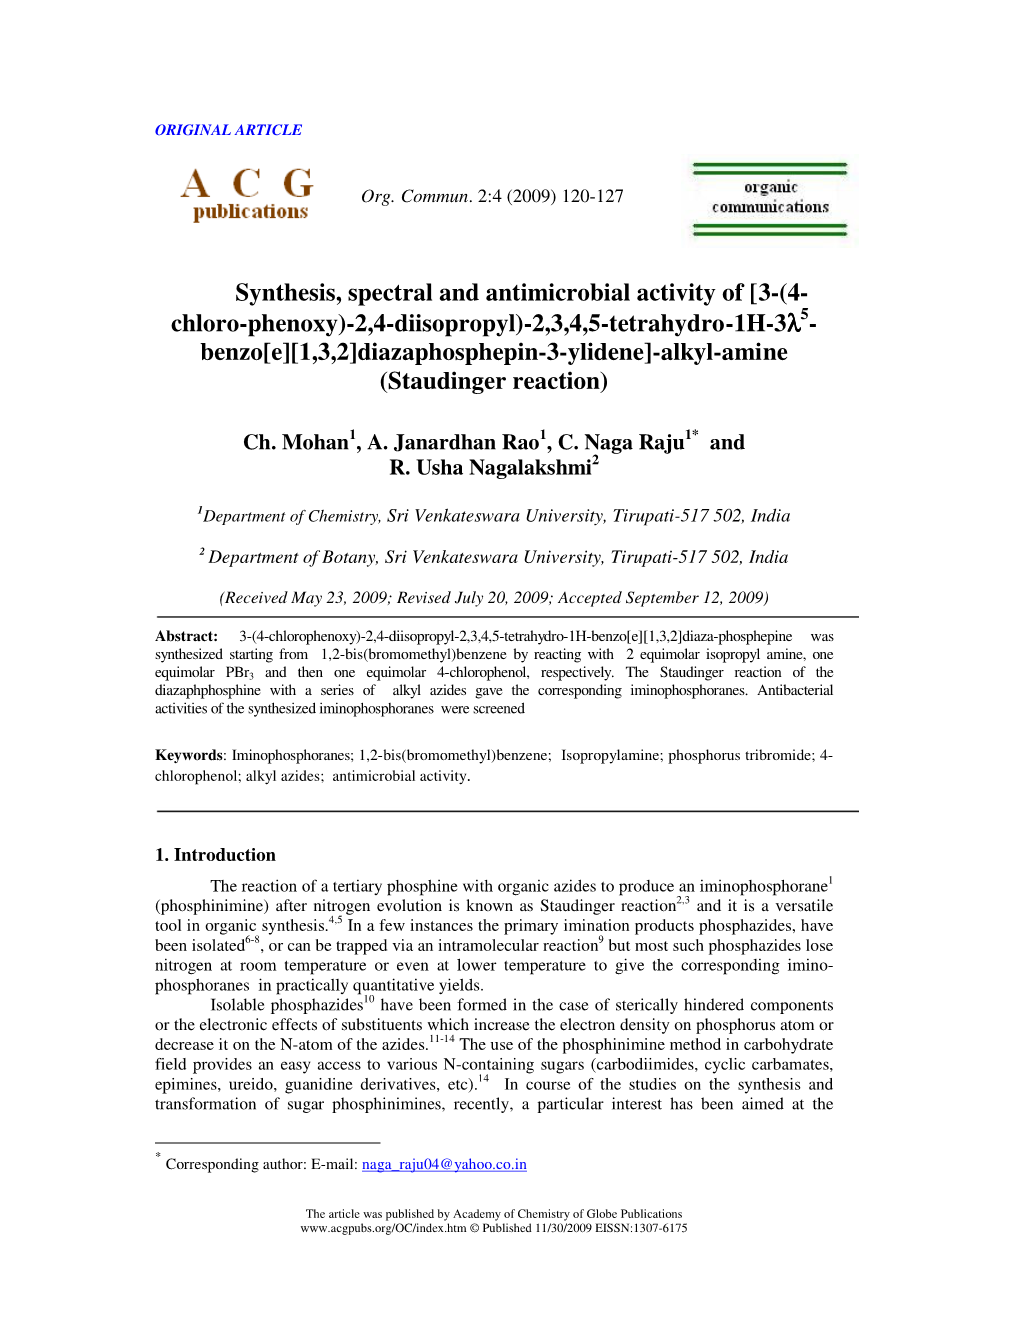 Synthesis, Spectral and Antimicrobial Activity of [3-(4- Chloro-Phenoxy)-2,4